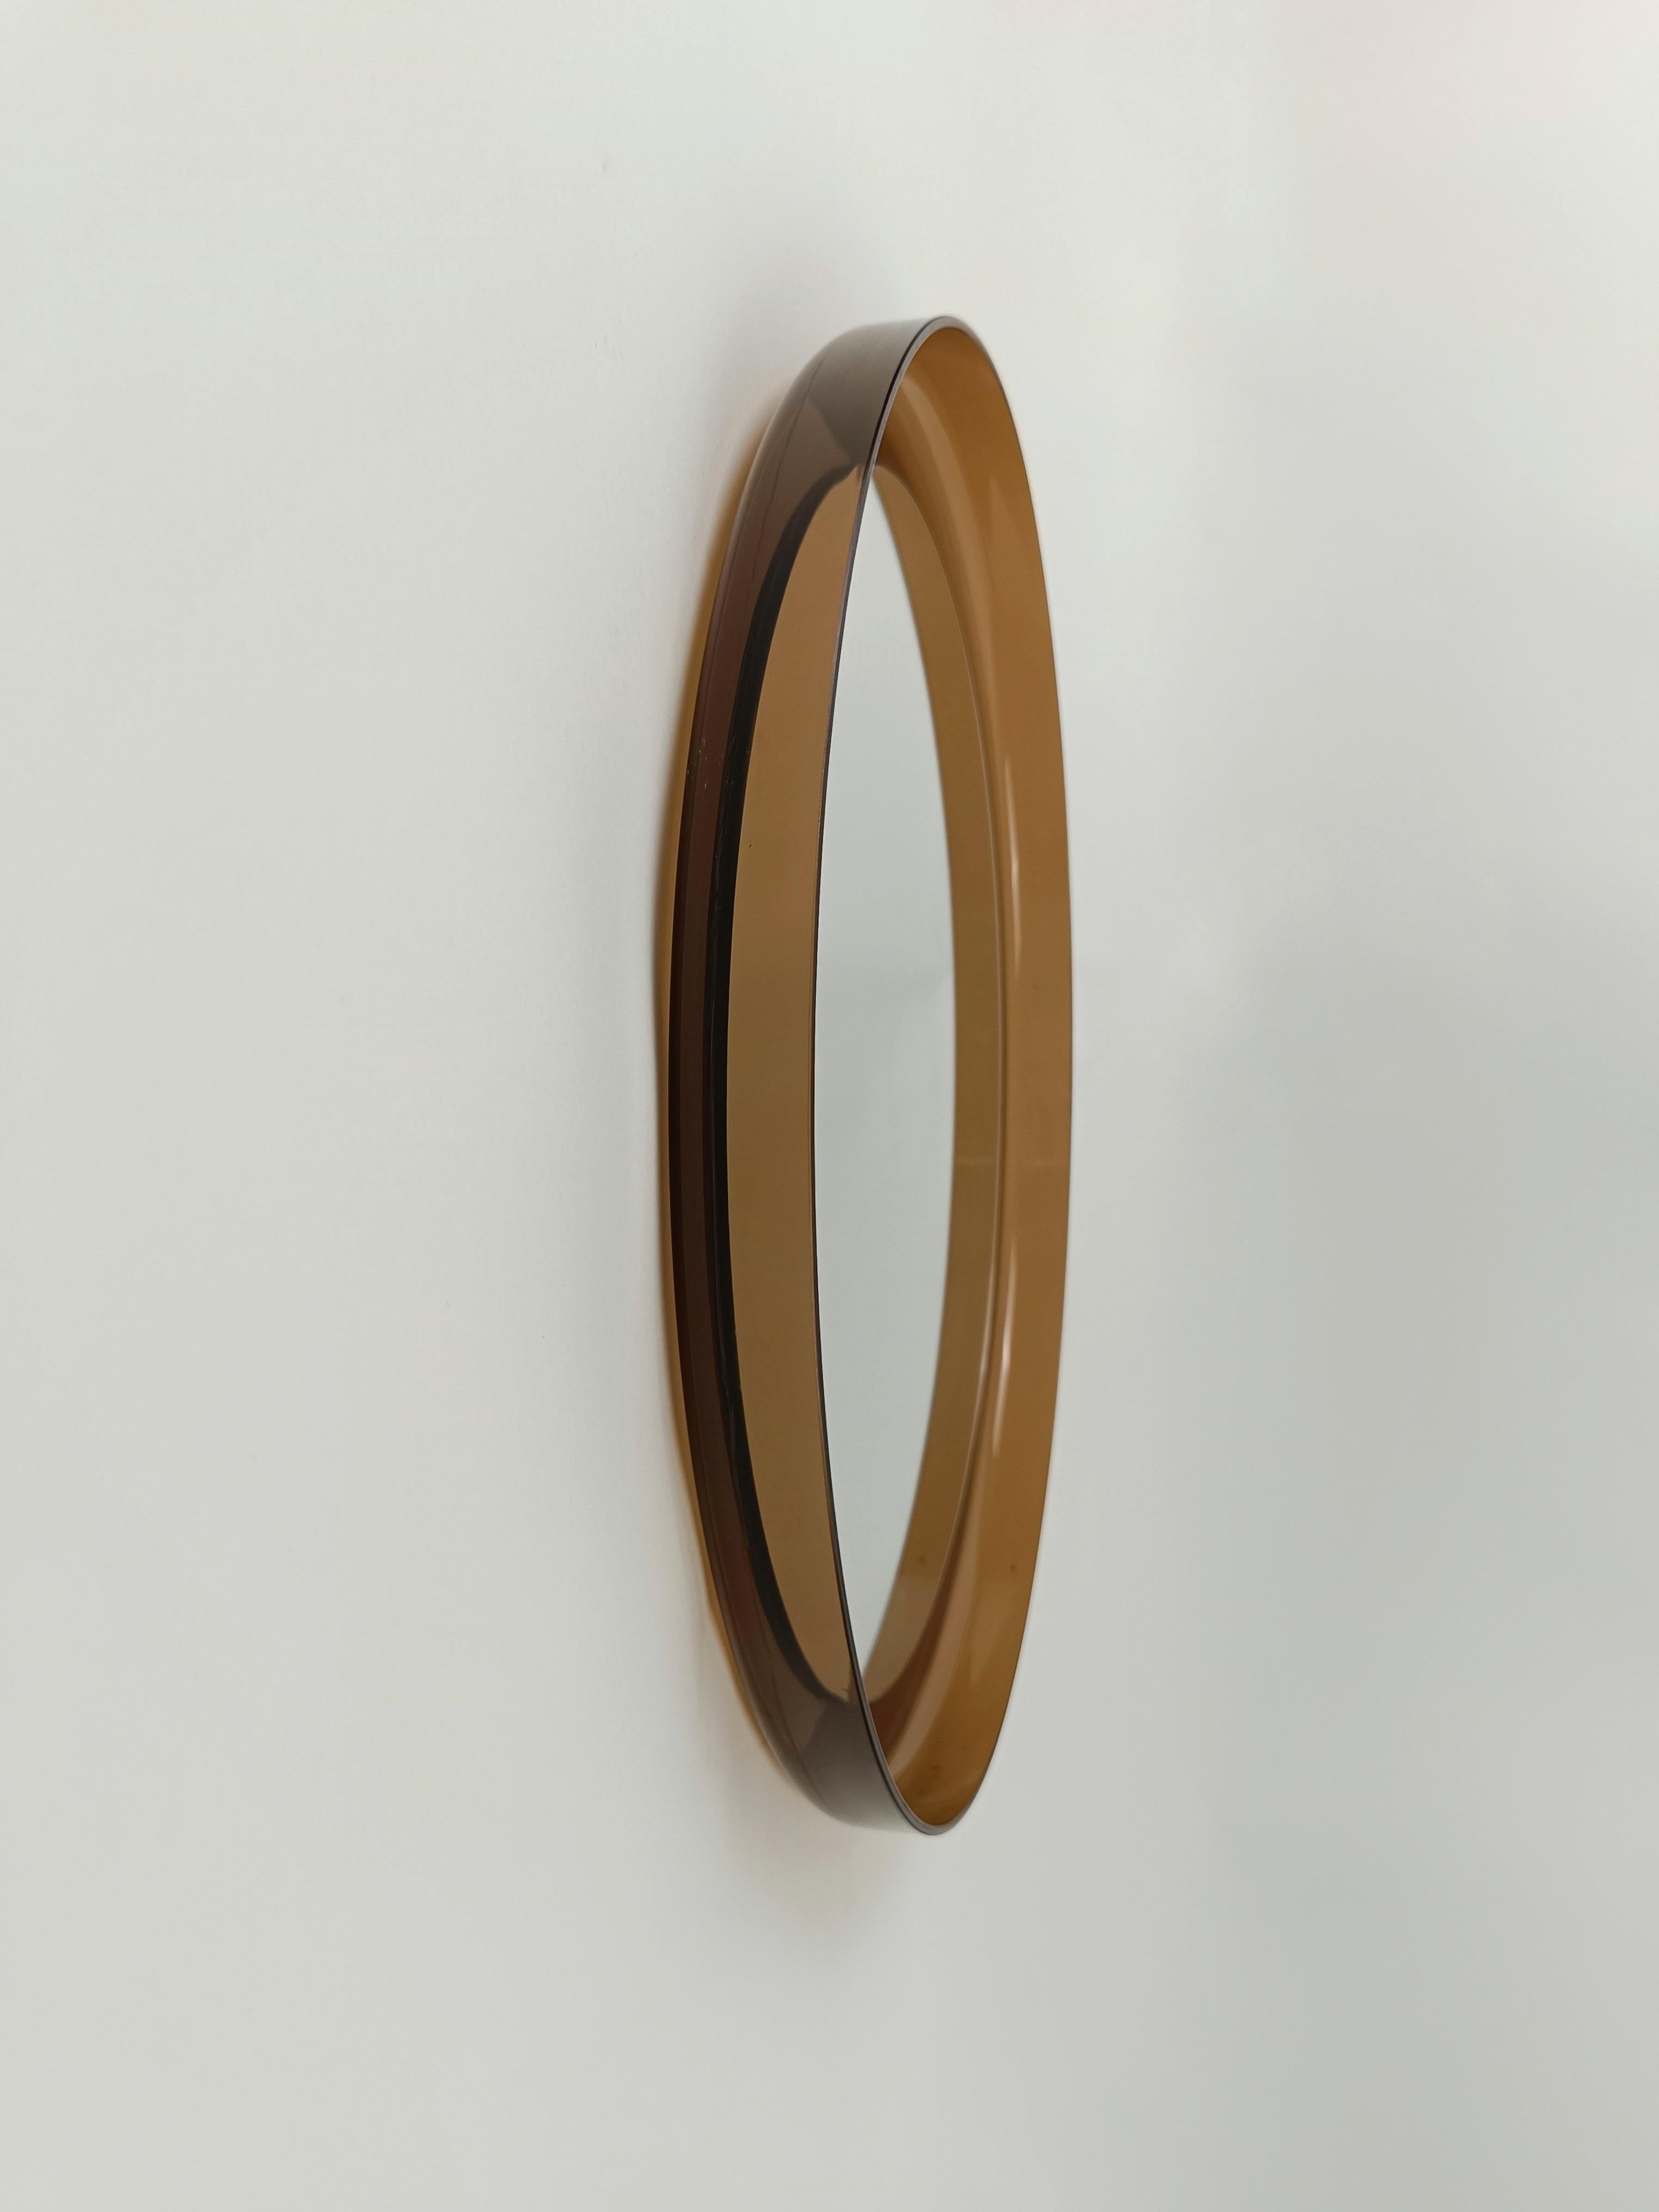 20th Century An Italian Space Age Round Mirror in Smoked Lucite by Guzzini 1960s  For Sale